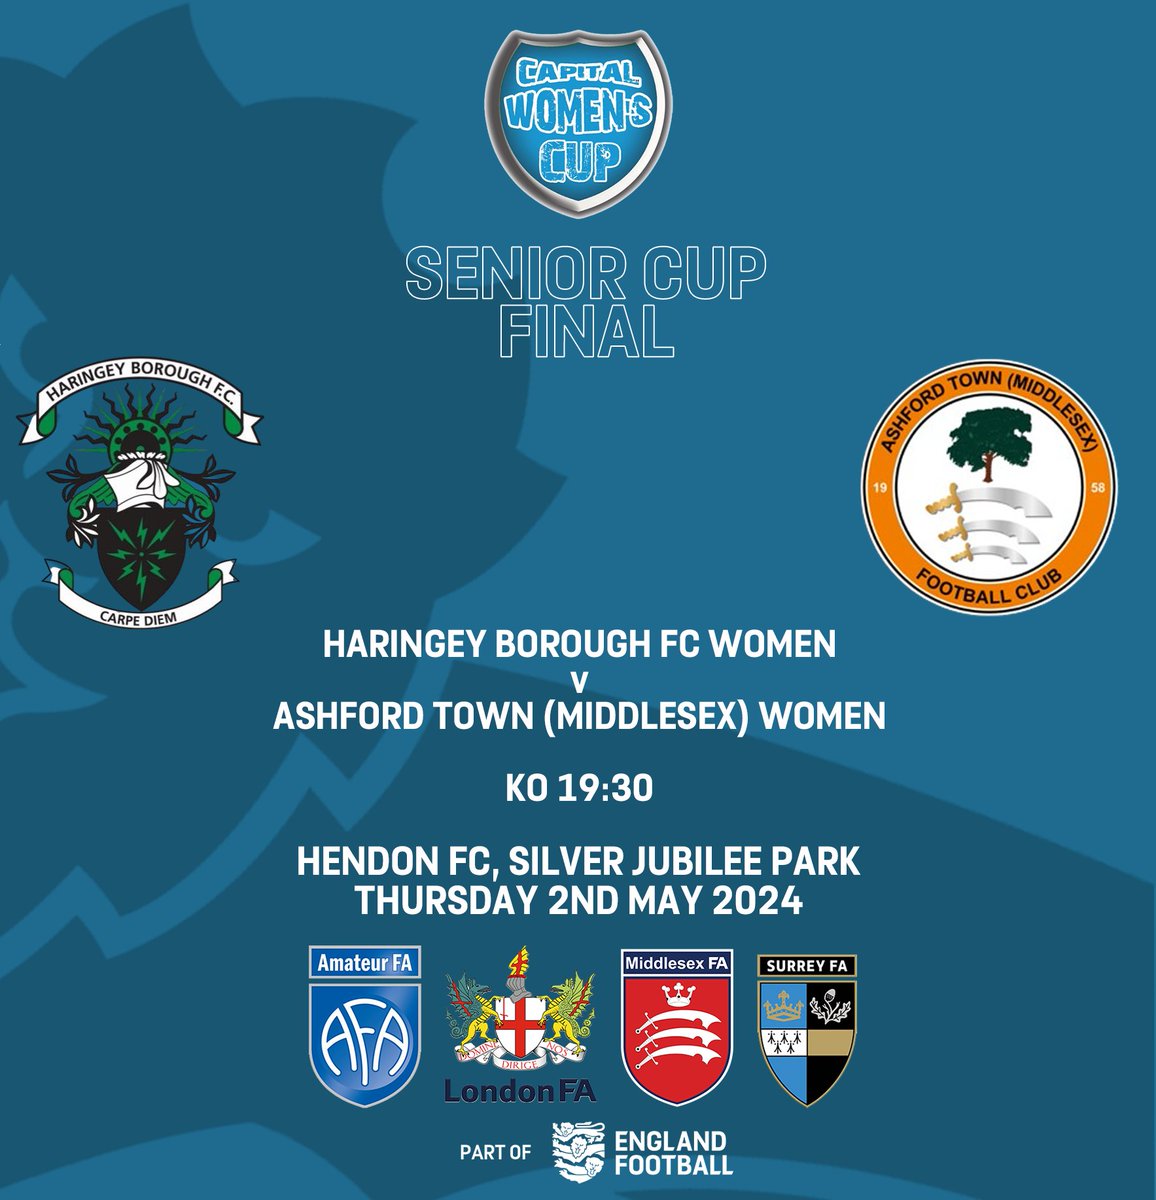 The finalists have been confirmed for the Capital Women's Cup Finals 🏆 Junior Cup @cpfc_w U18 vs @SouthLDNLaces Intermediate Cup @leatherheadwfc vs @BrentfordFCW The finals will take place on Sunday 27 April at Meadowbank, RH4 1DX